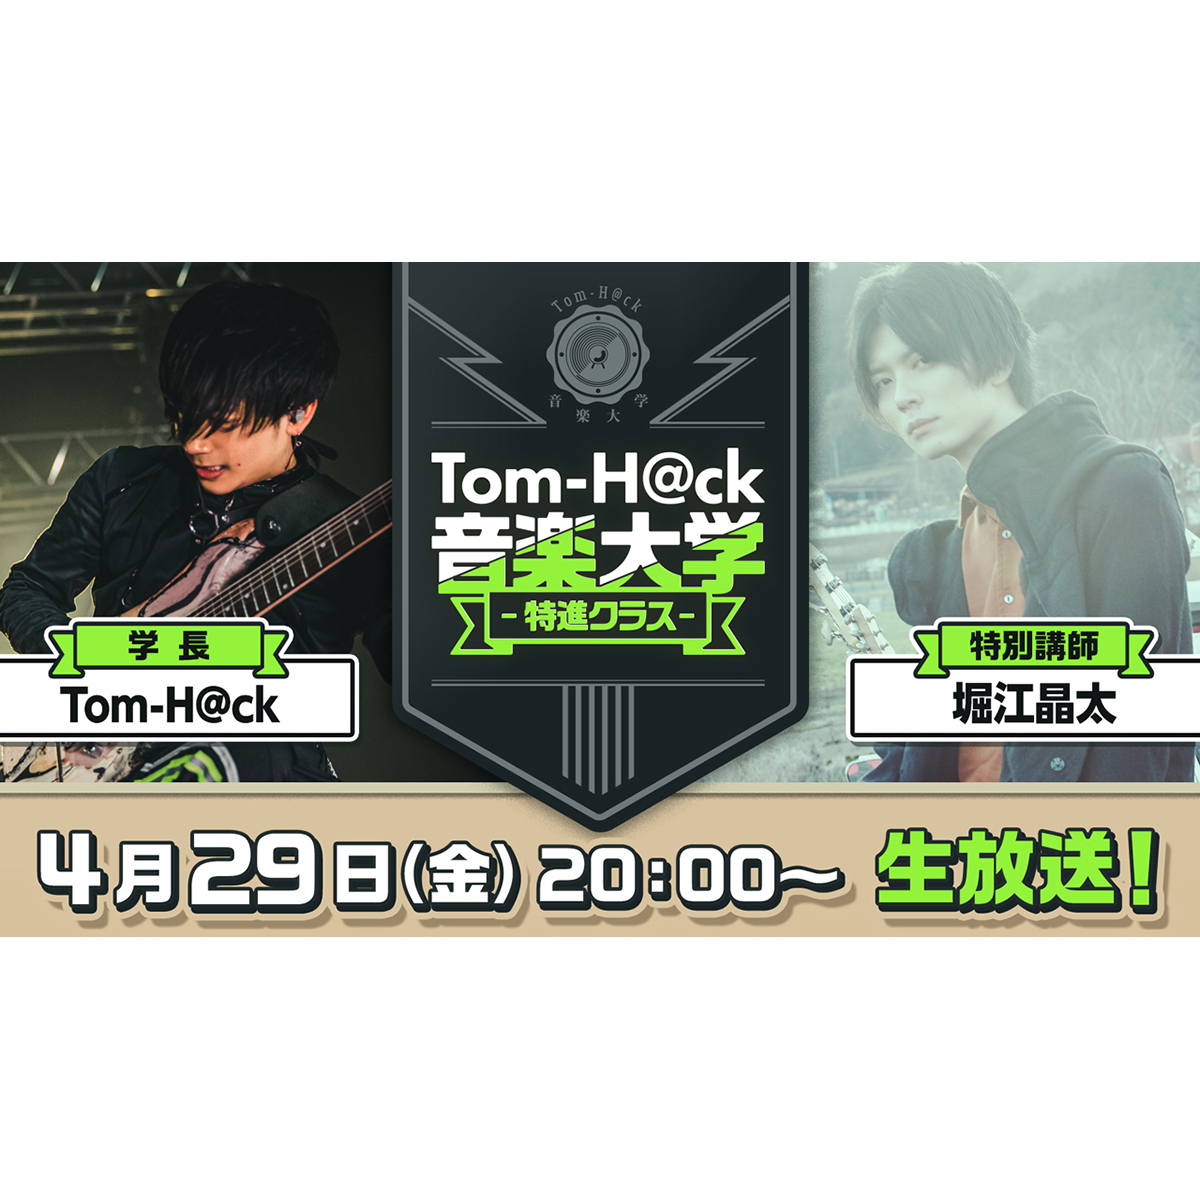 Toｍ-H@ckと堀江晶太が真剣音楽トーク！『Tom-H@ck音楽大学 -特進クラス-』4月29日20時より生放送！ - 画像一覧（3/4）